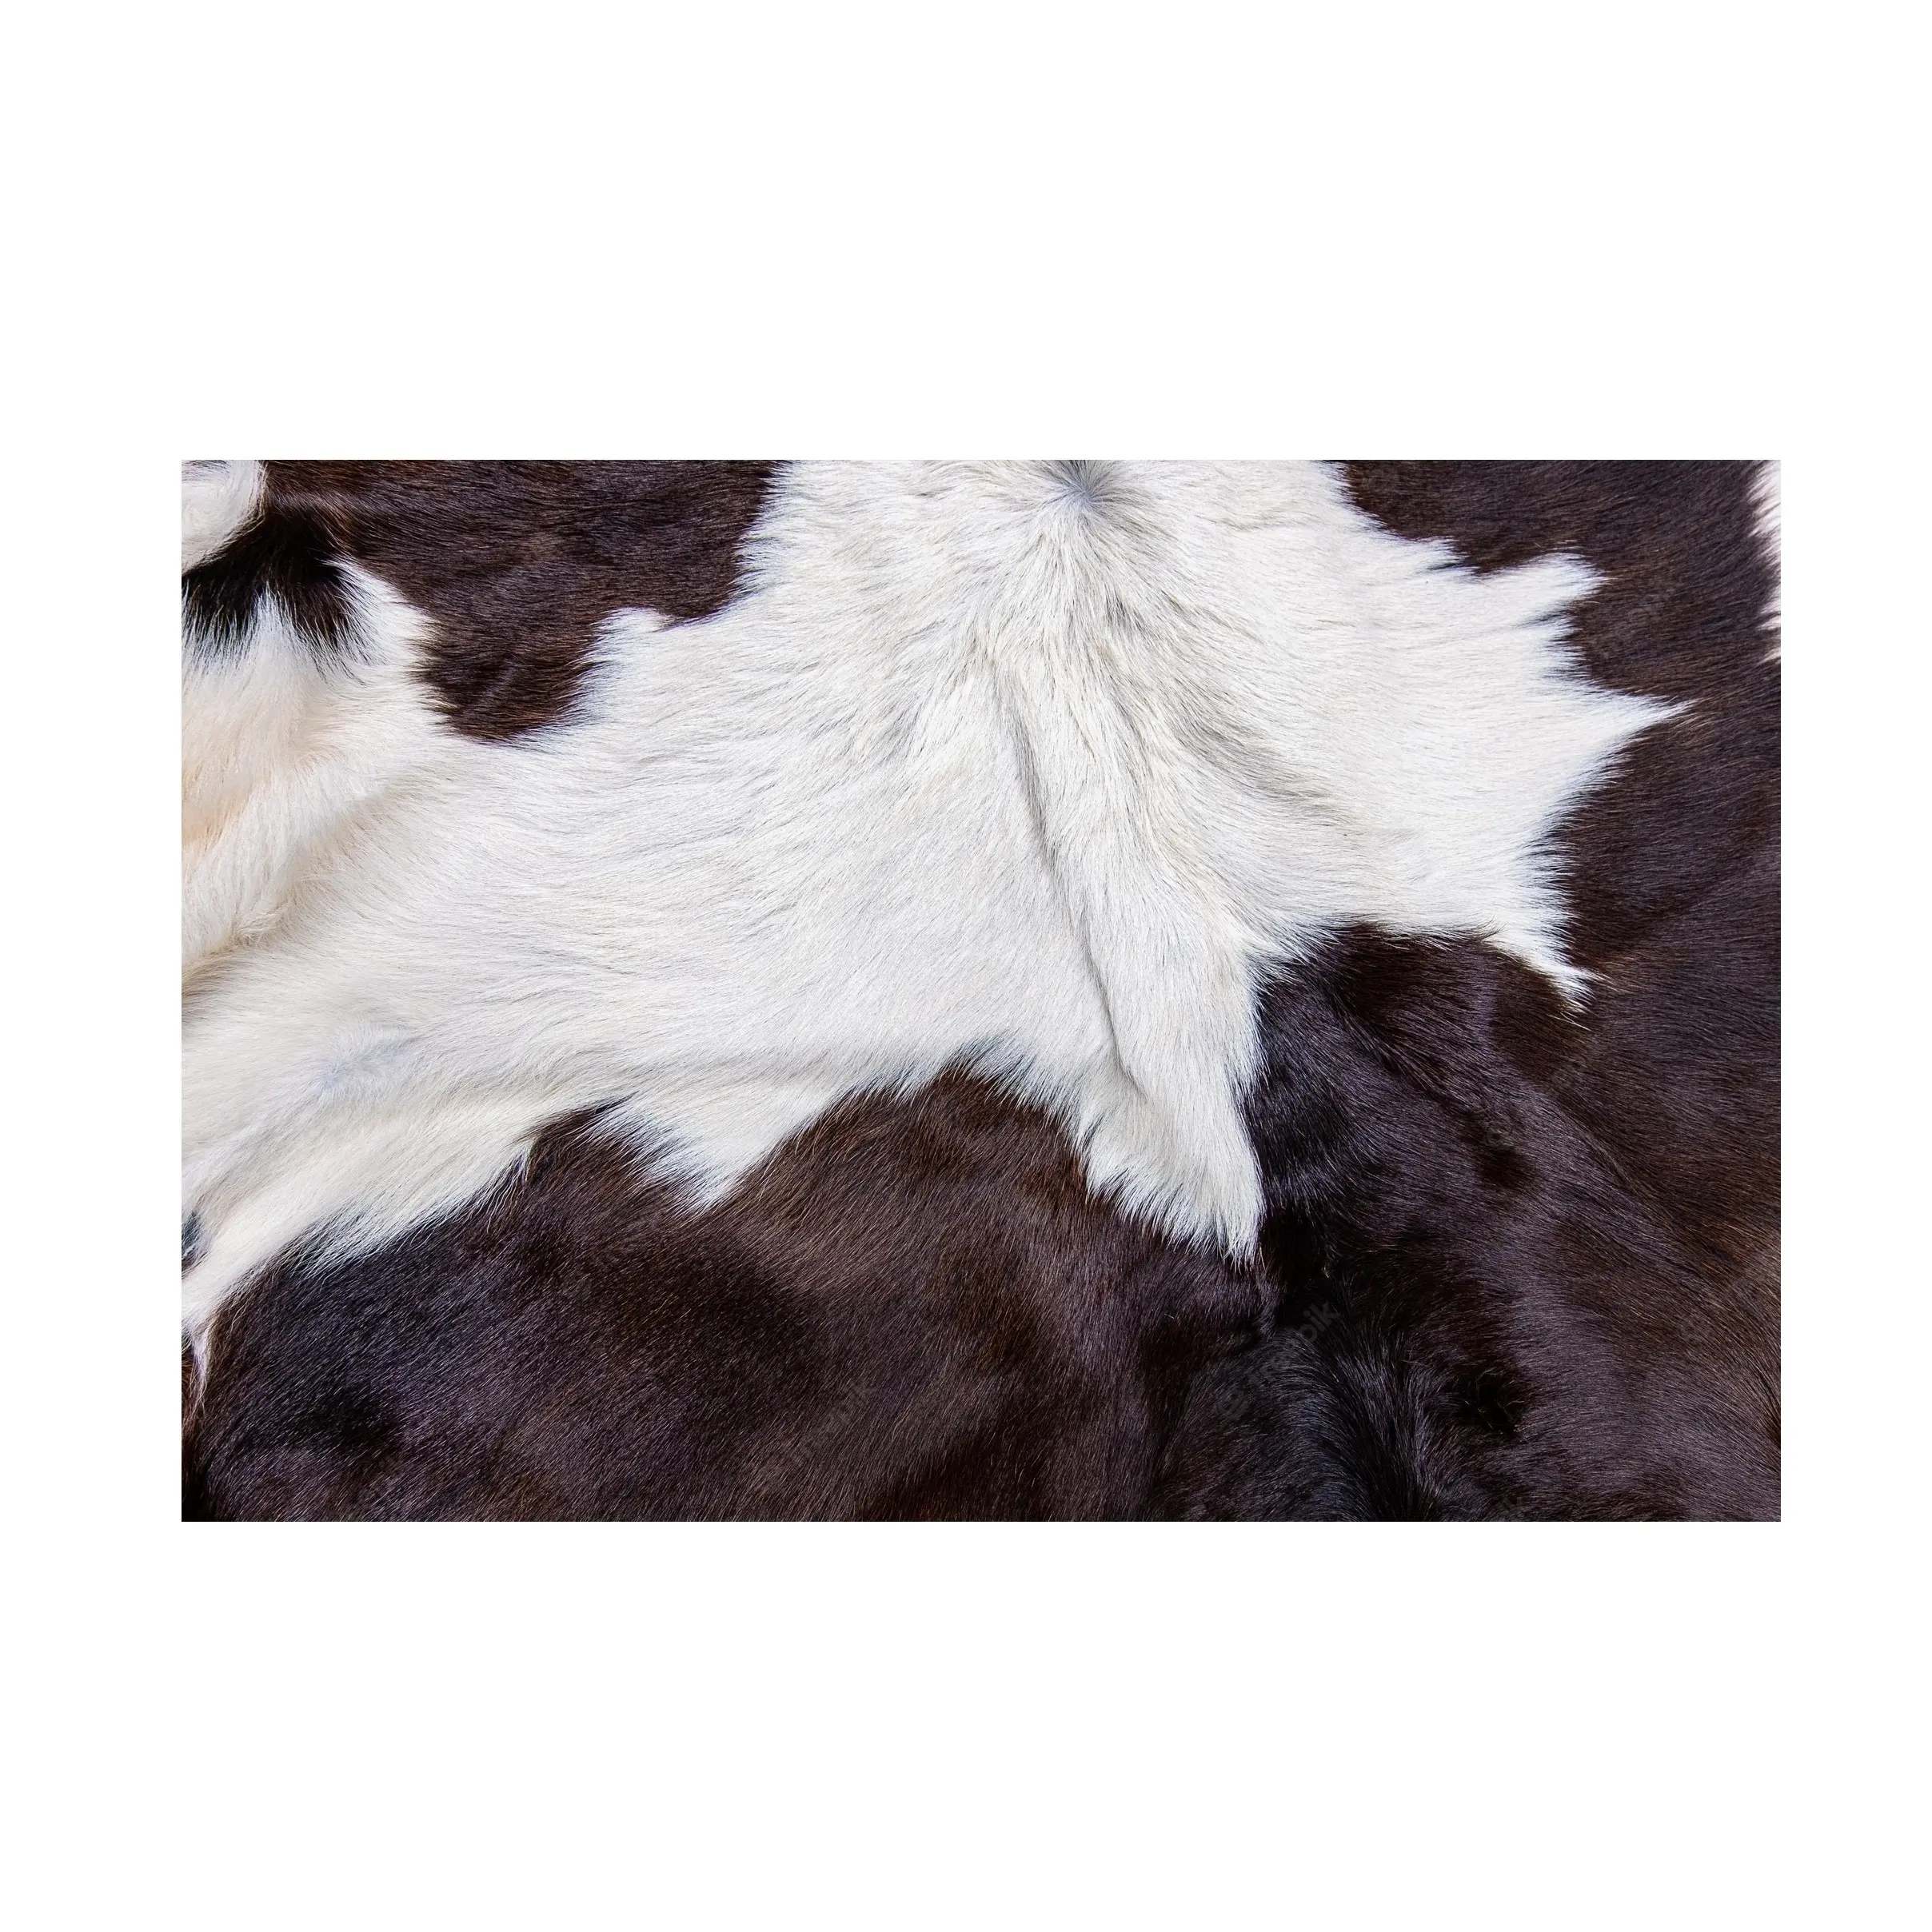 Dry And Wet Salted Cow Hides / Skins / Animal Cattle Hides Available Here At Best Wholesale Pricing